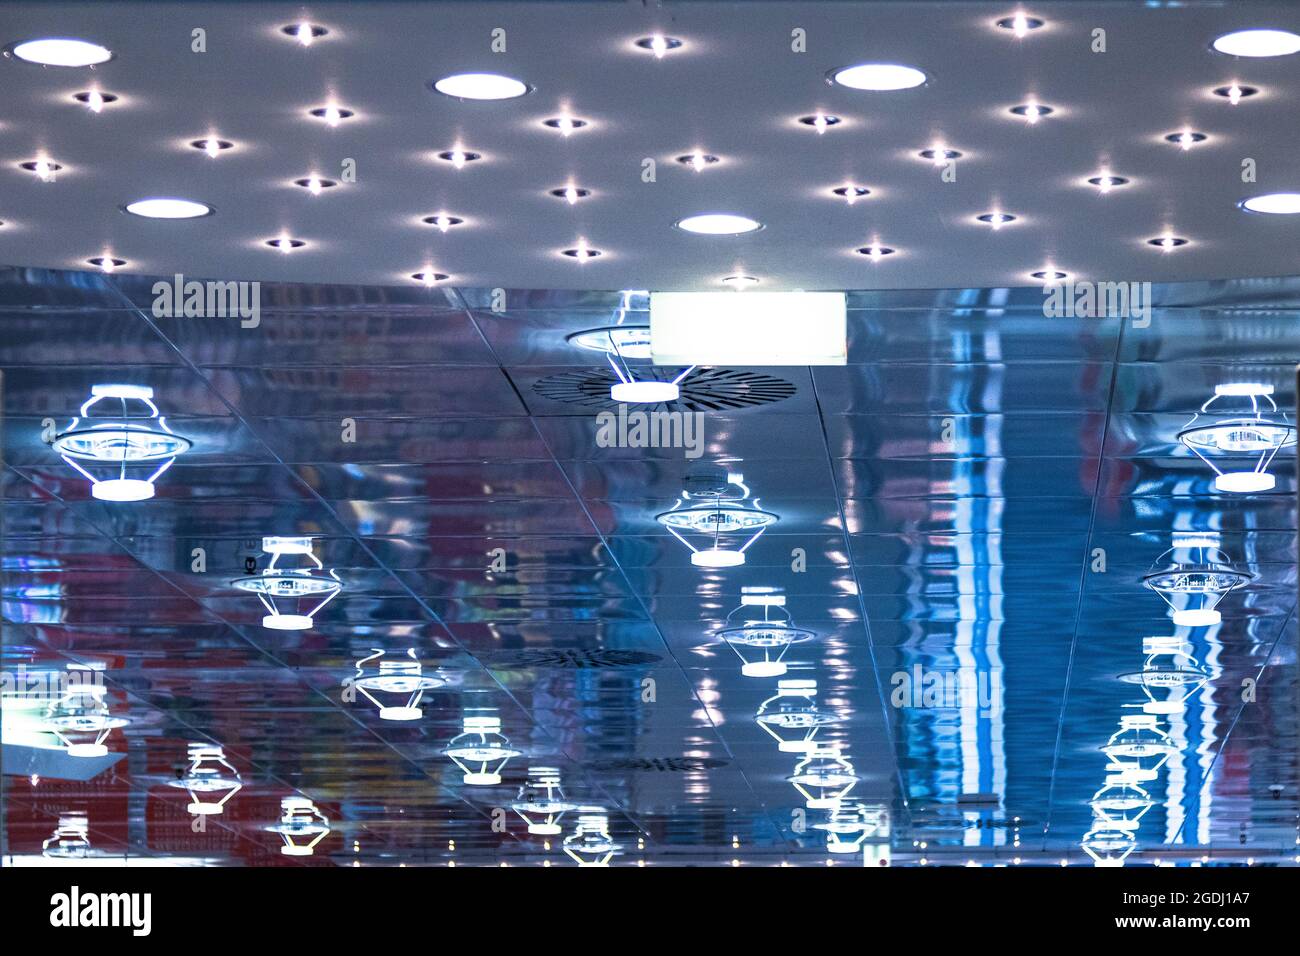 Ceiling lamps are reflected in glass, creating blue light with many structures. Stock Photo